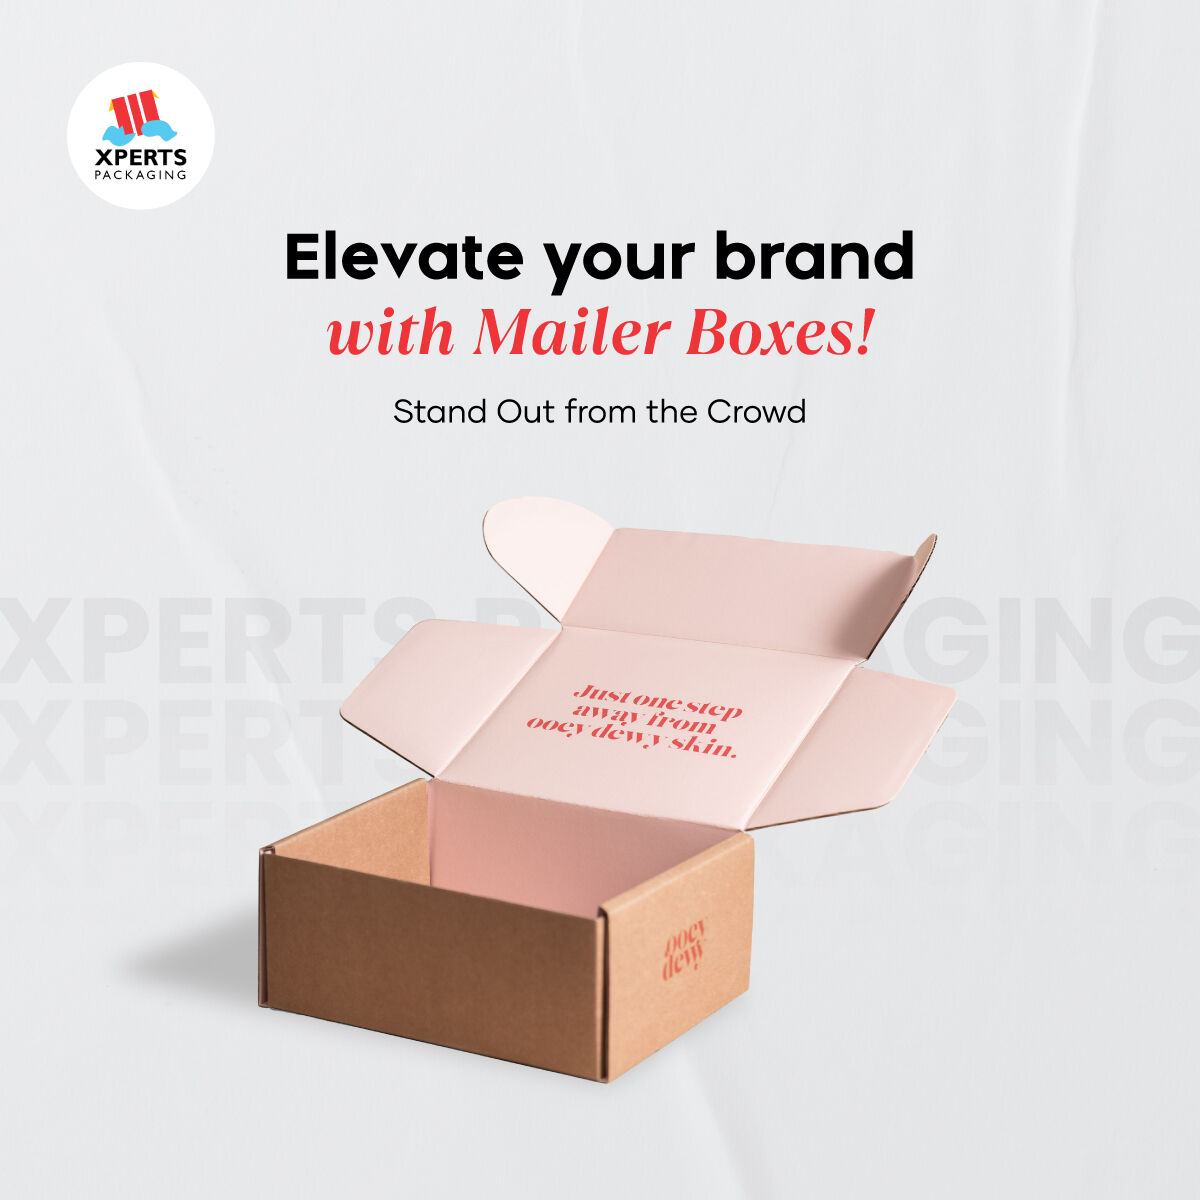 📦 Elevate Your Brand with Custom Mailer Boxes from Xperts Packaging!

Benefits:

1. Boost brand awareness
2. Enhance customer experience
3. Ensure product safety
4. Drive business promotion

.
#XpertsPackaging
#CustomMailerBoxes
#BrandedPackaging
#ProductProtection